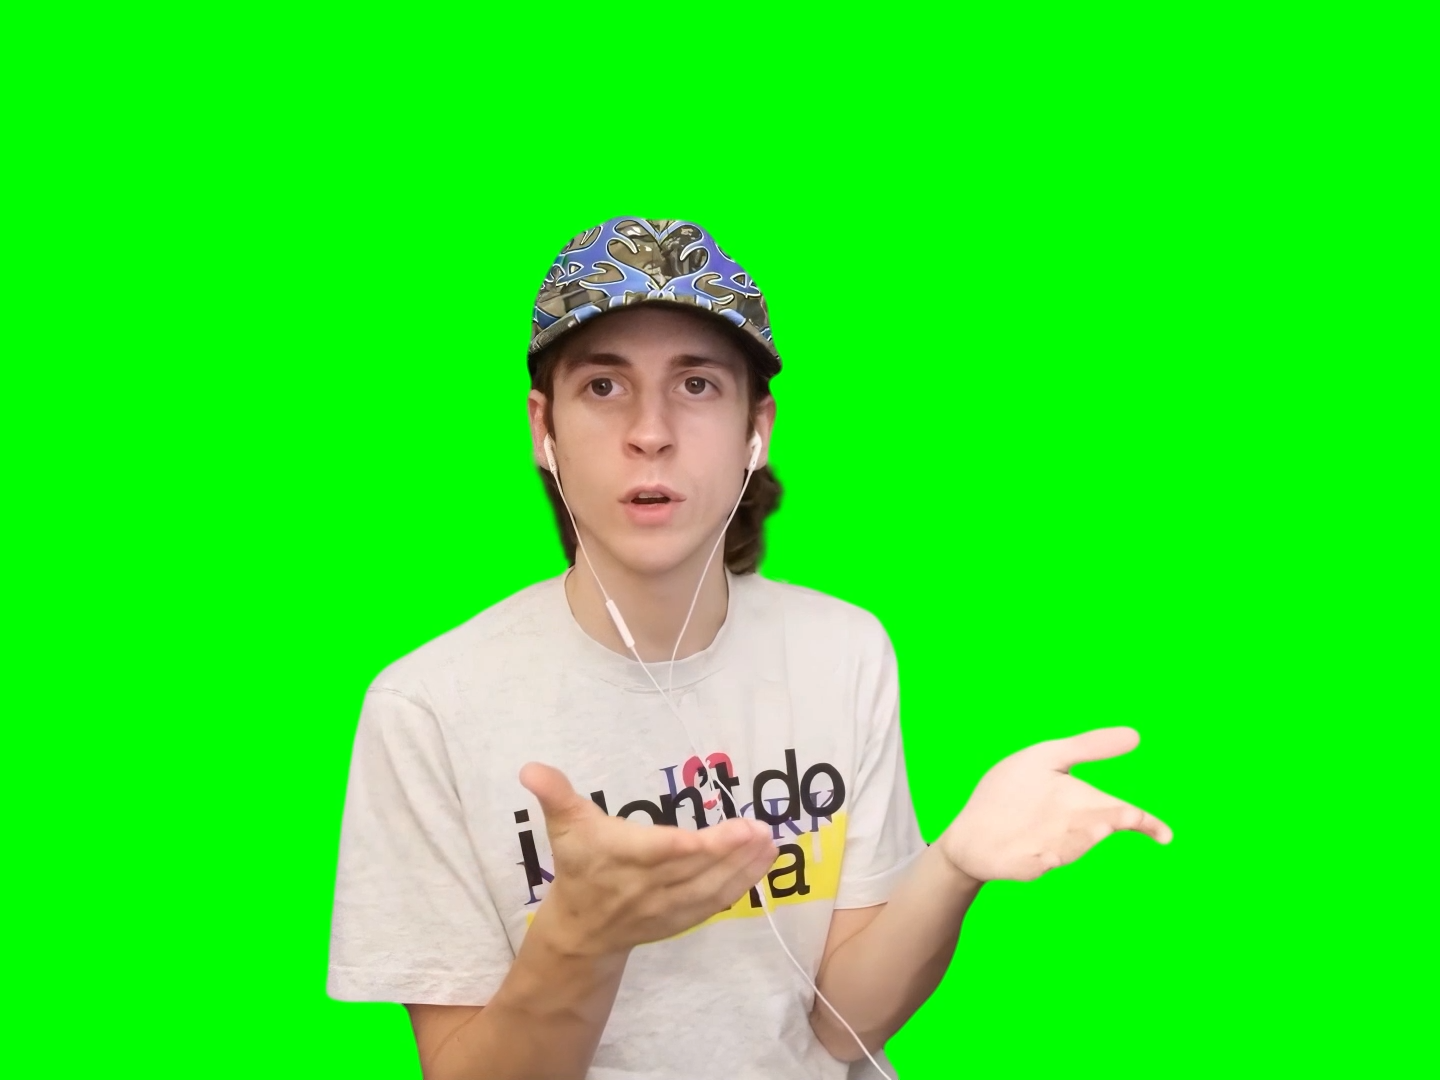 When you goof around, you find out - Nick Mira (Green Screen)